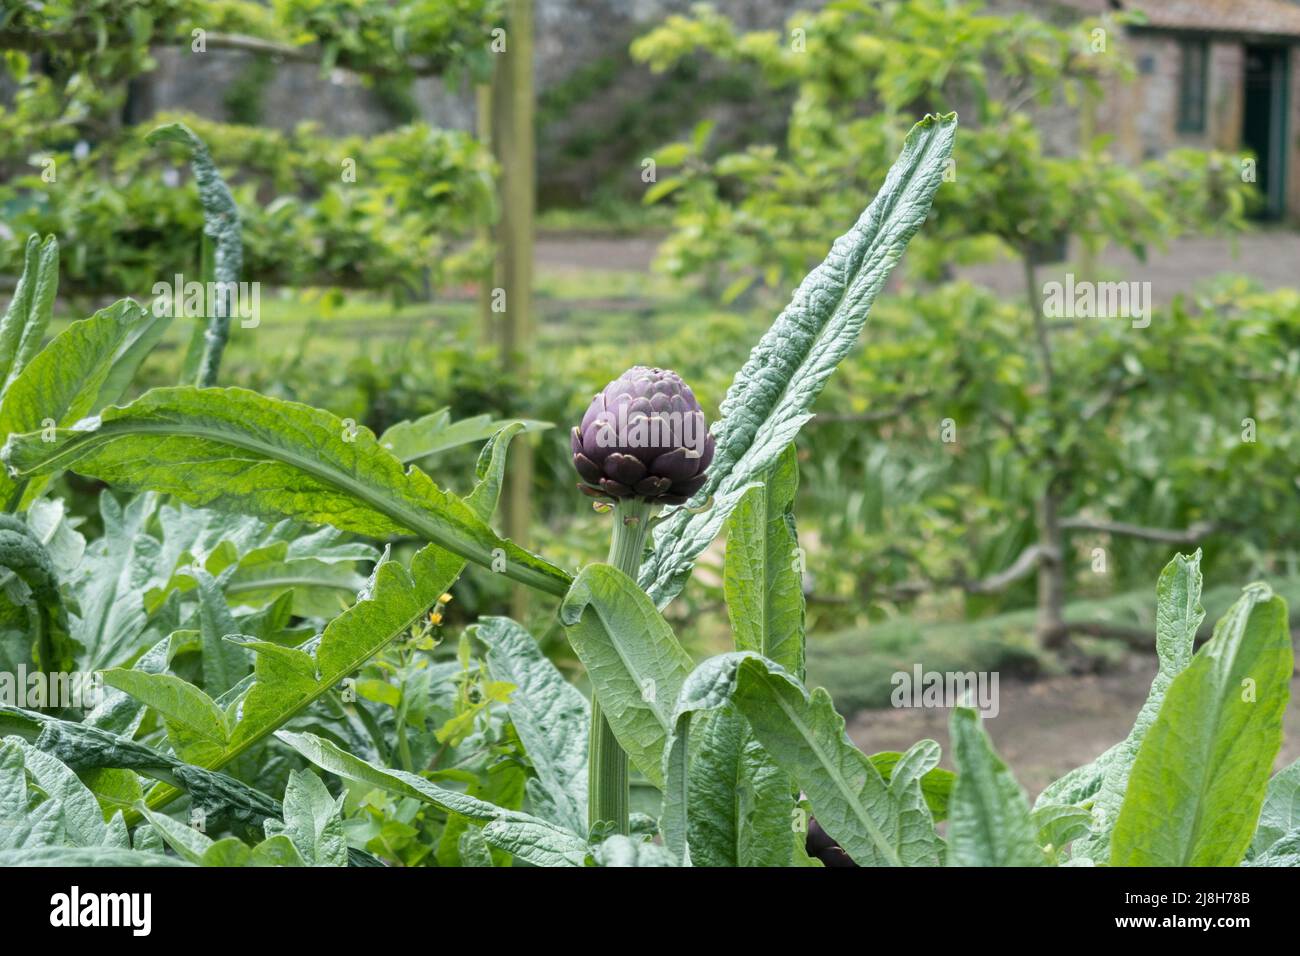 Artichokes growing in old country garden Stock Photo